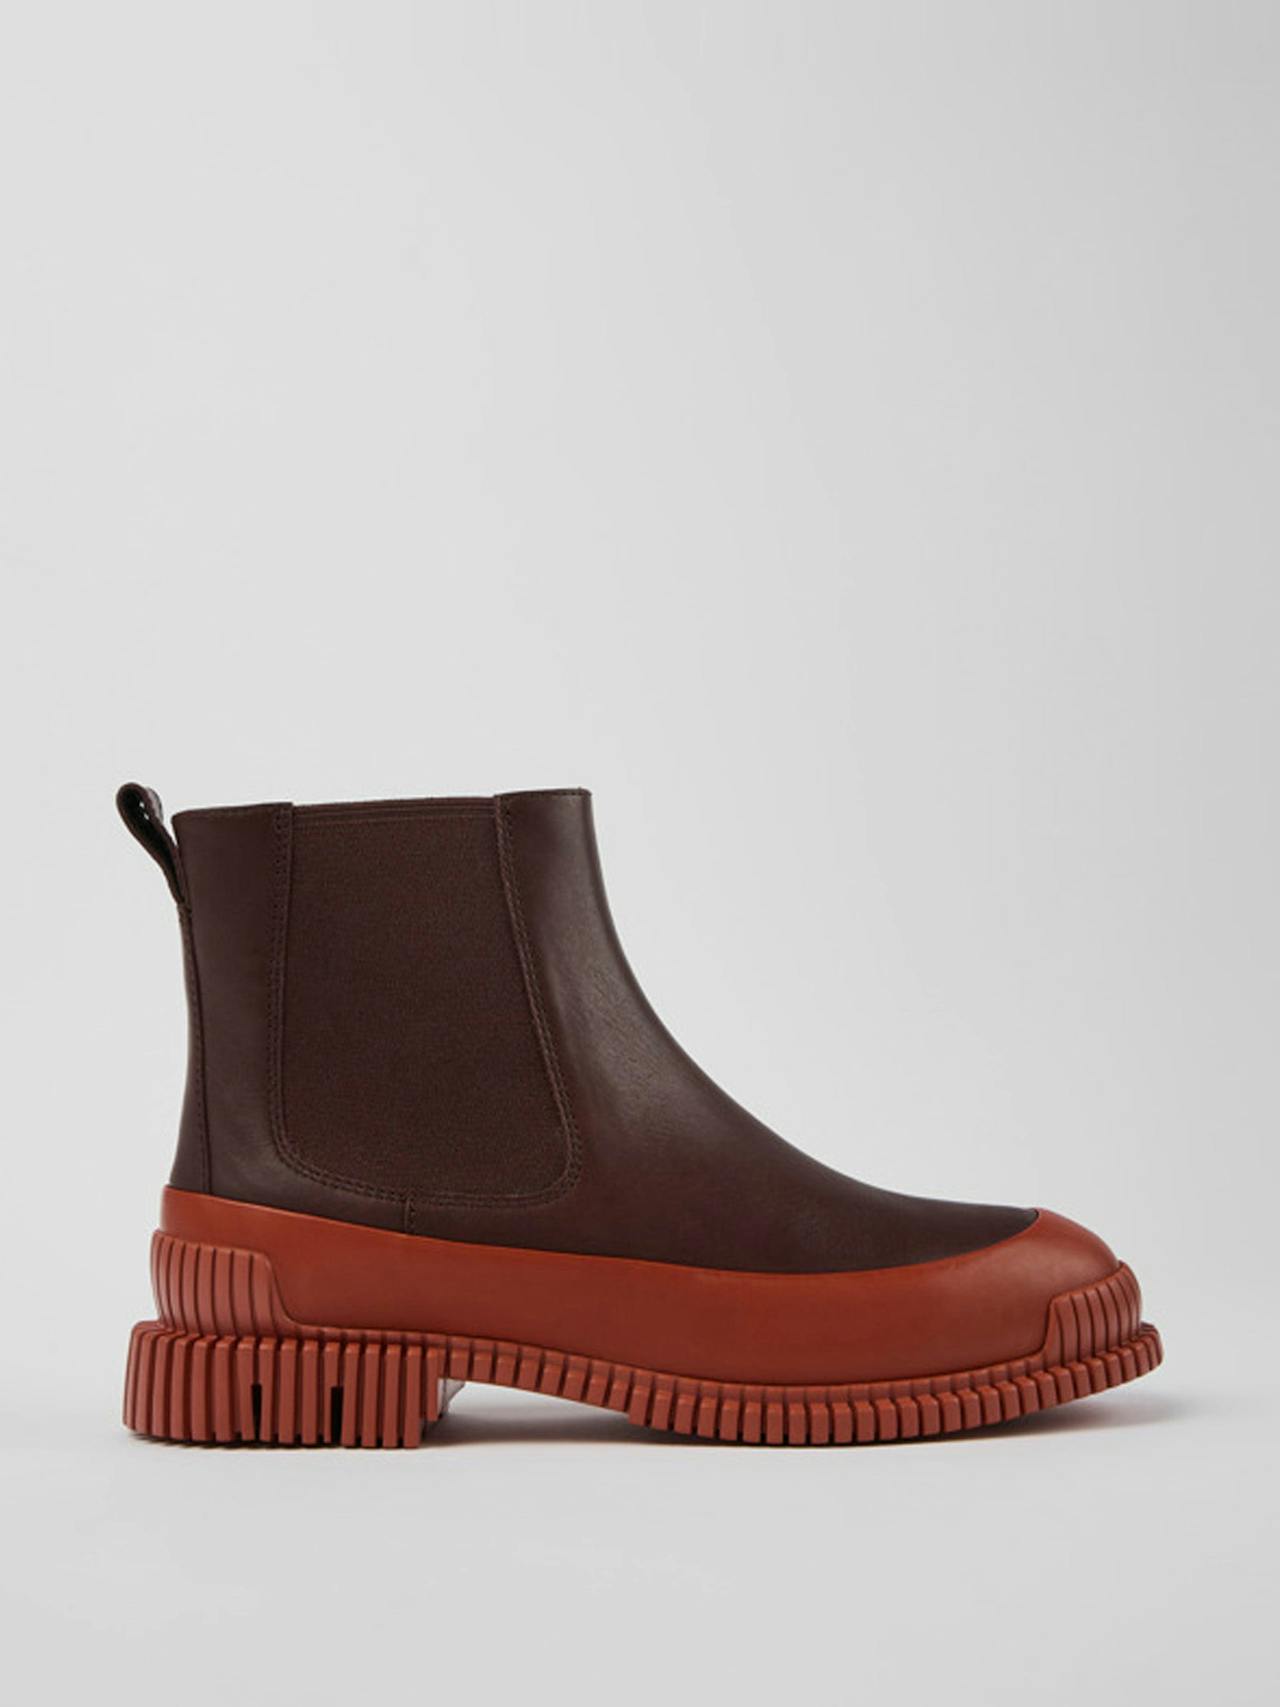 Red and brown leather Chelsea boots